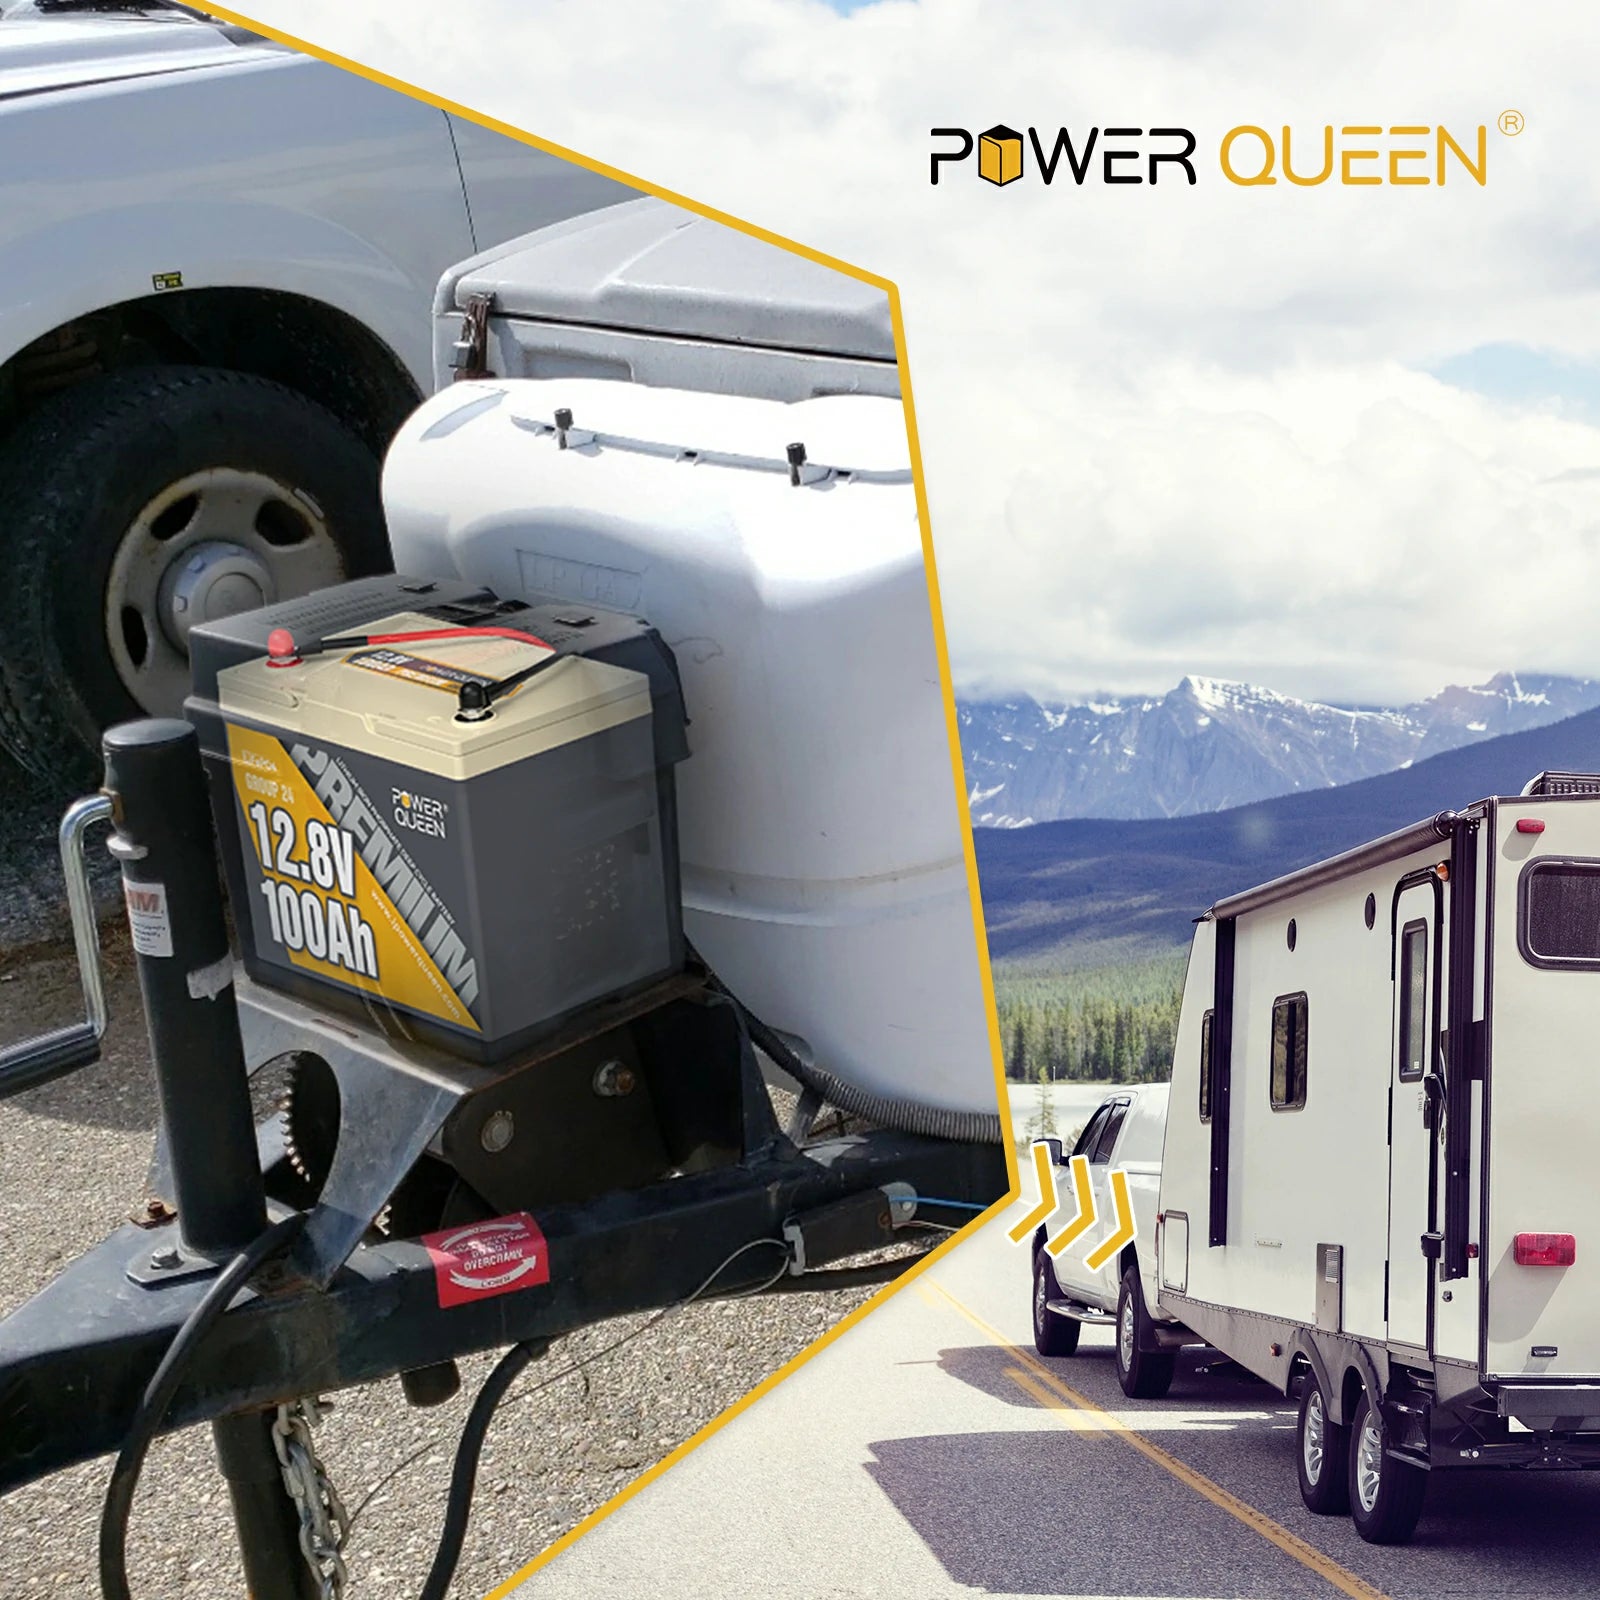 Power-Queen-Group-24-Deep-cycle-battery-dimension-prefect-for-Trailver-RV